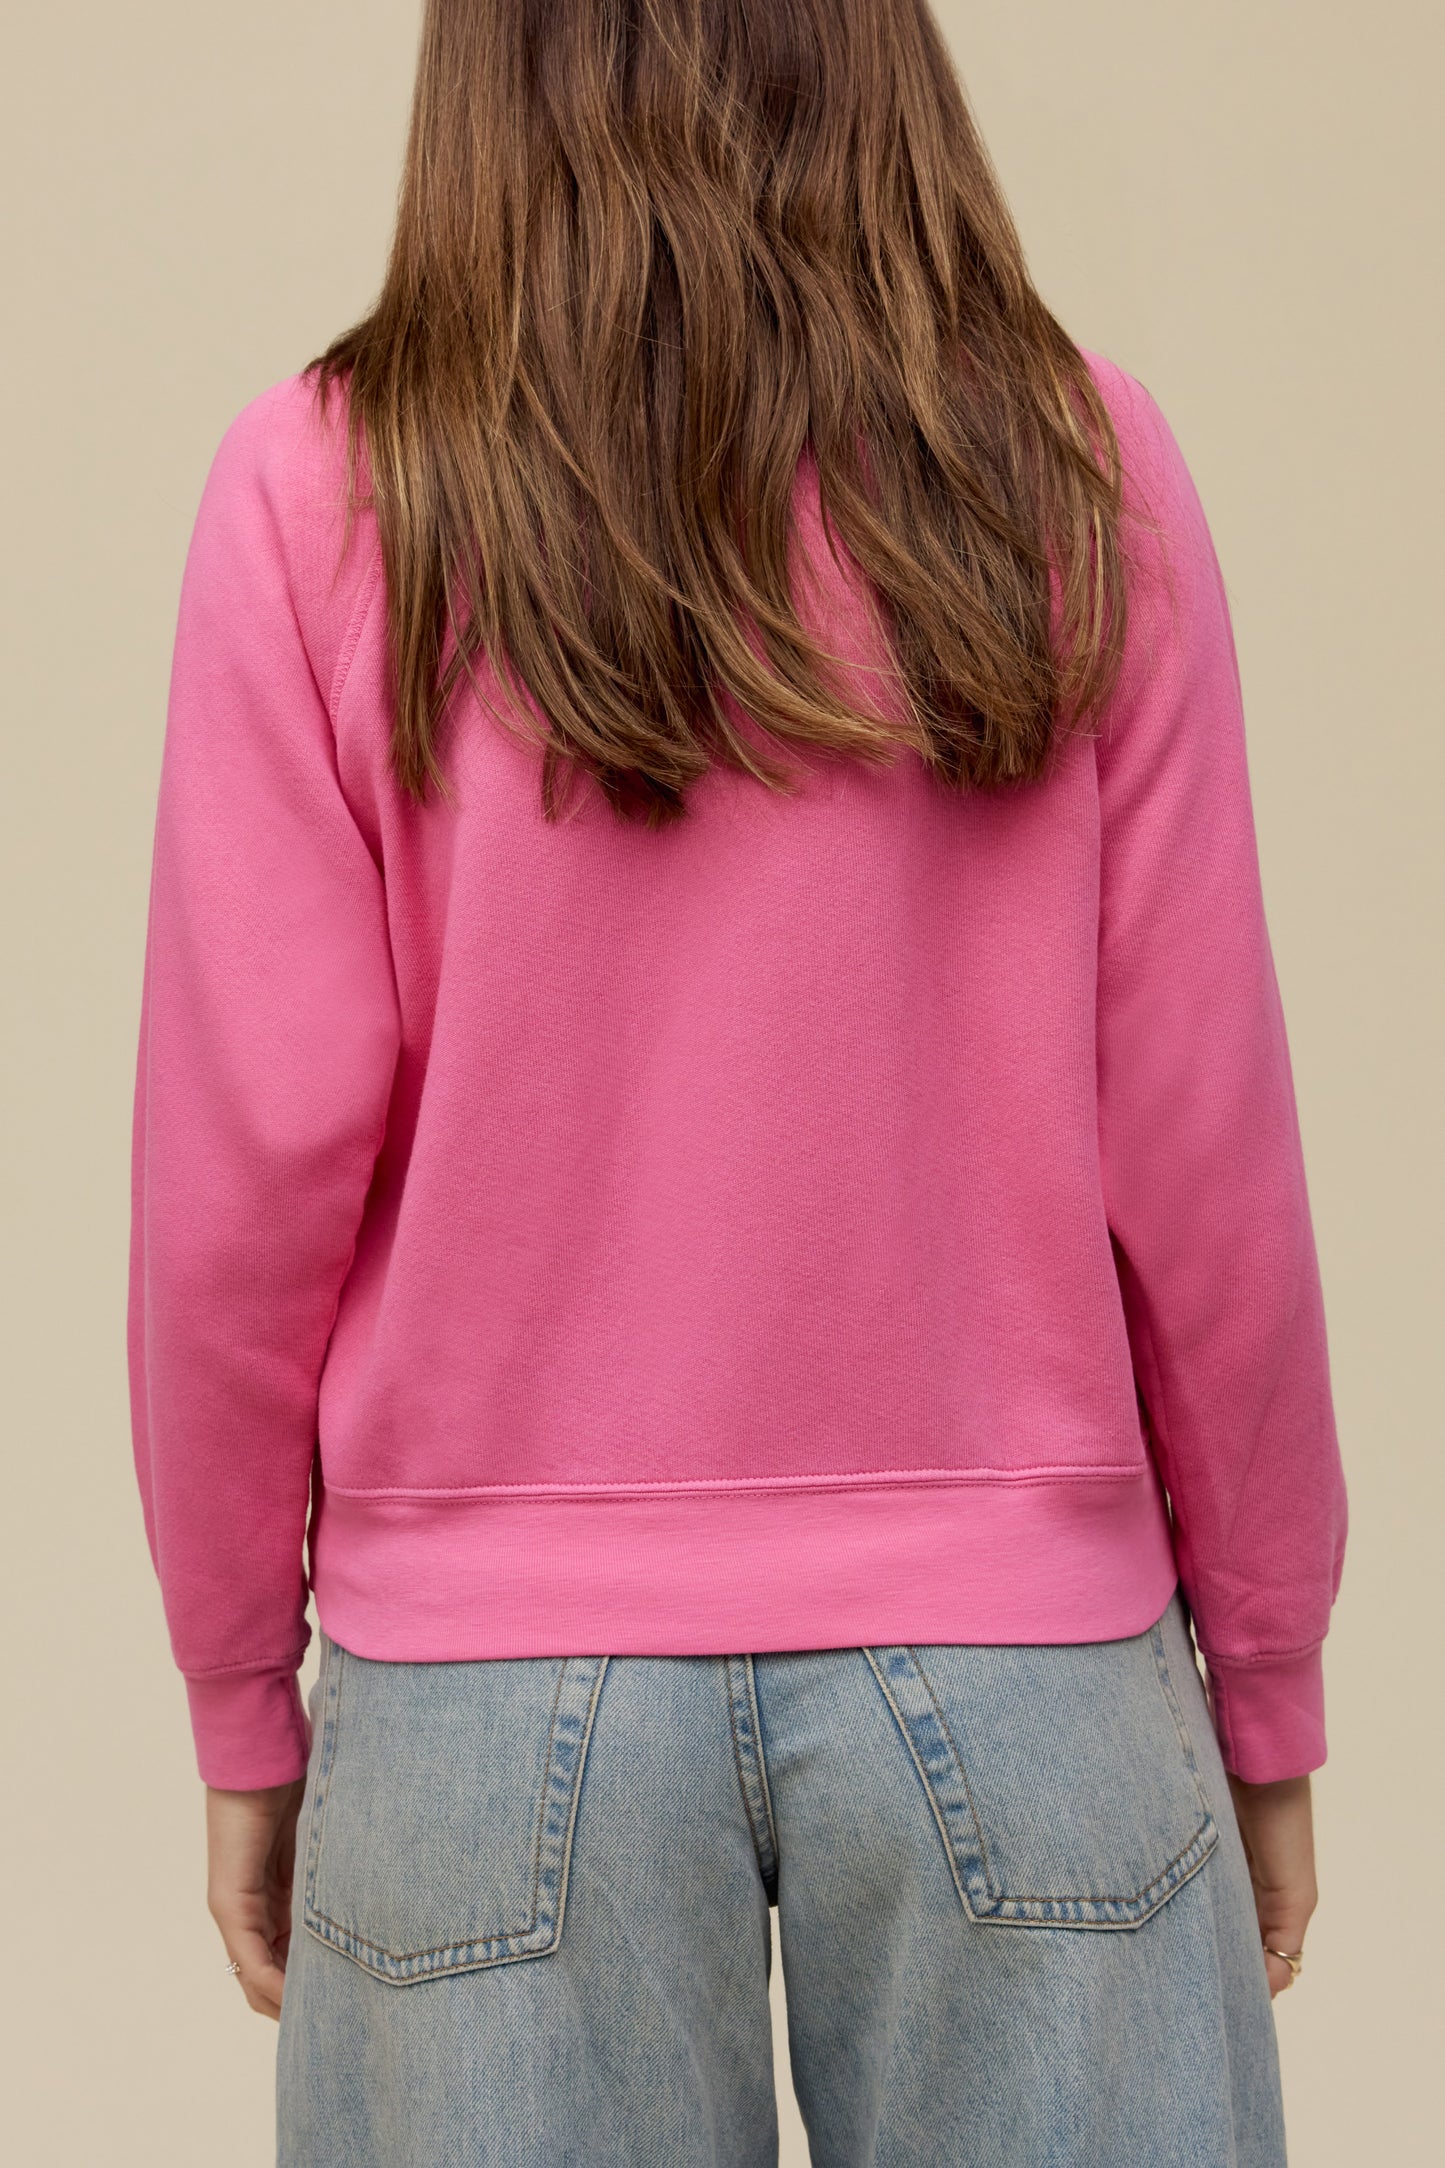 A model featuring a pink raglan crew stamped with Fleetwood Mac in a circle.